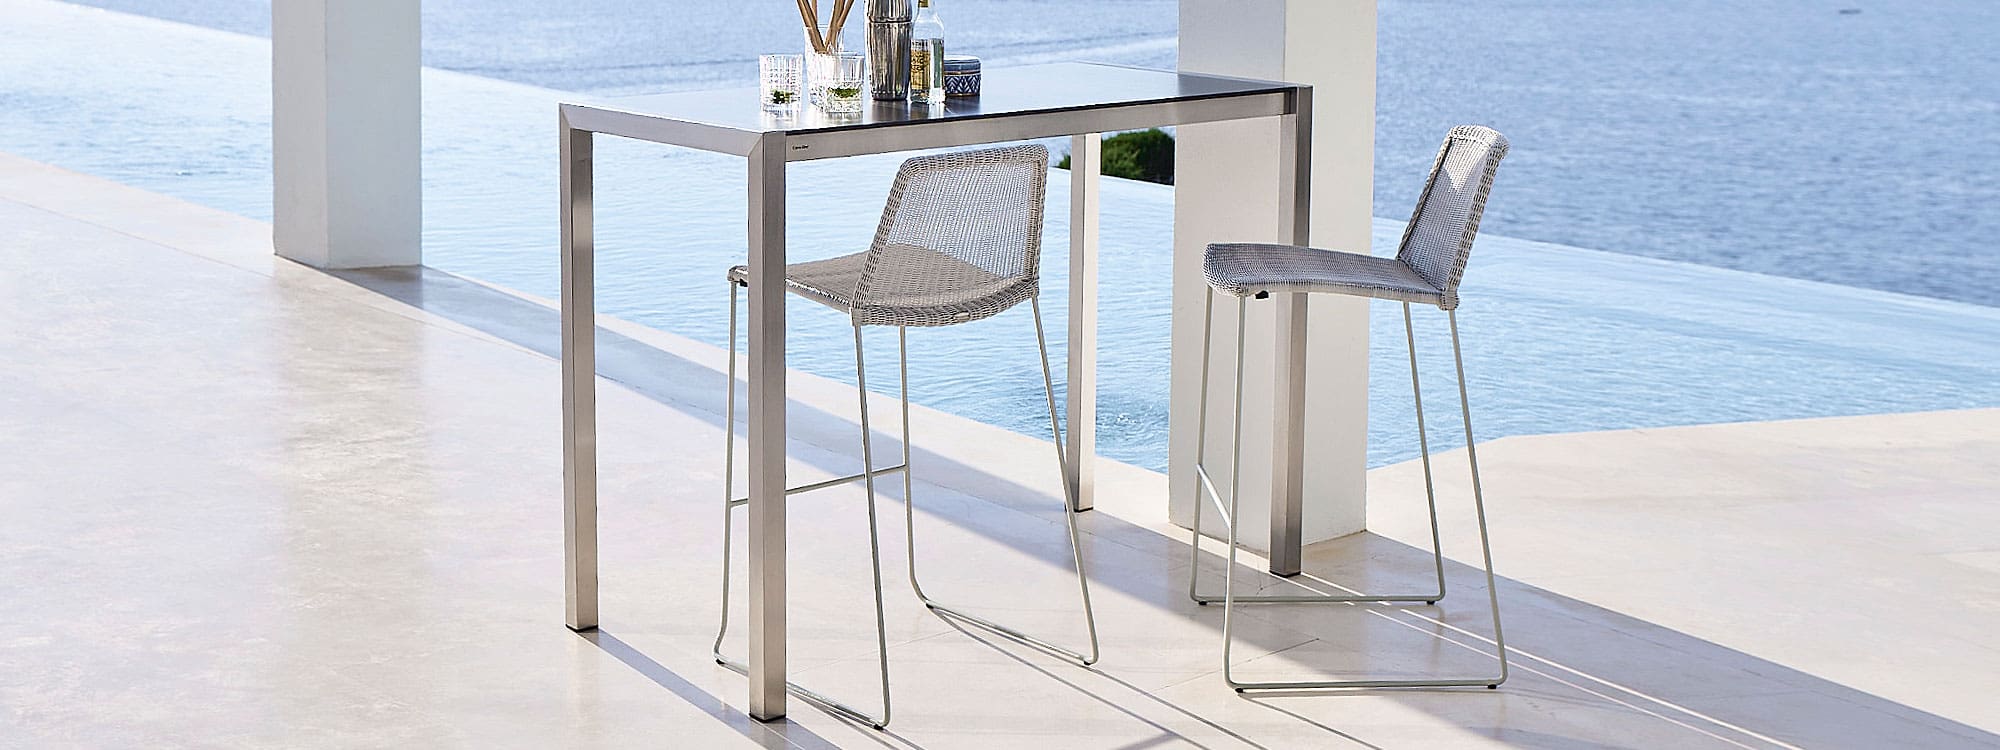 Image of white-grey Breeze modern outdoor bar stools and Cane-line bar table on poolside